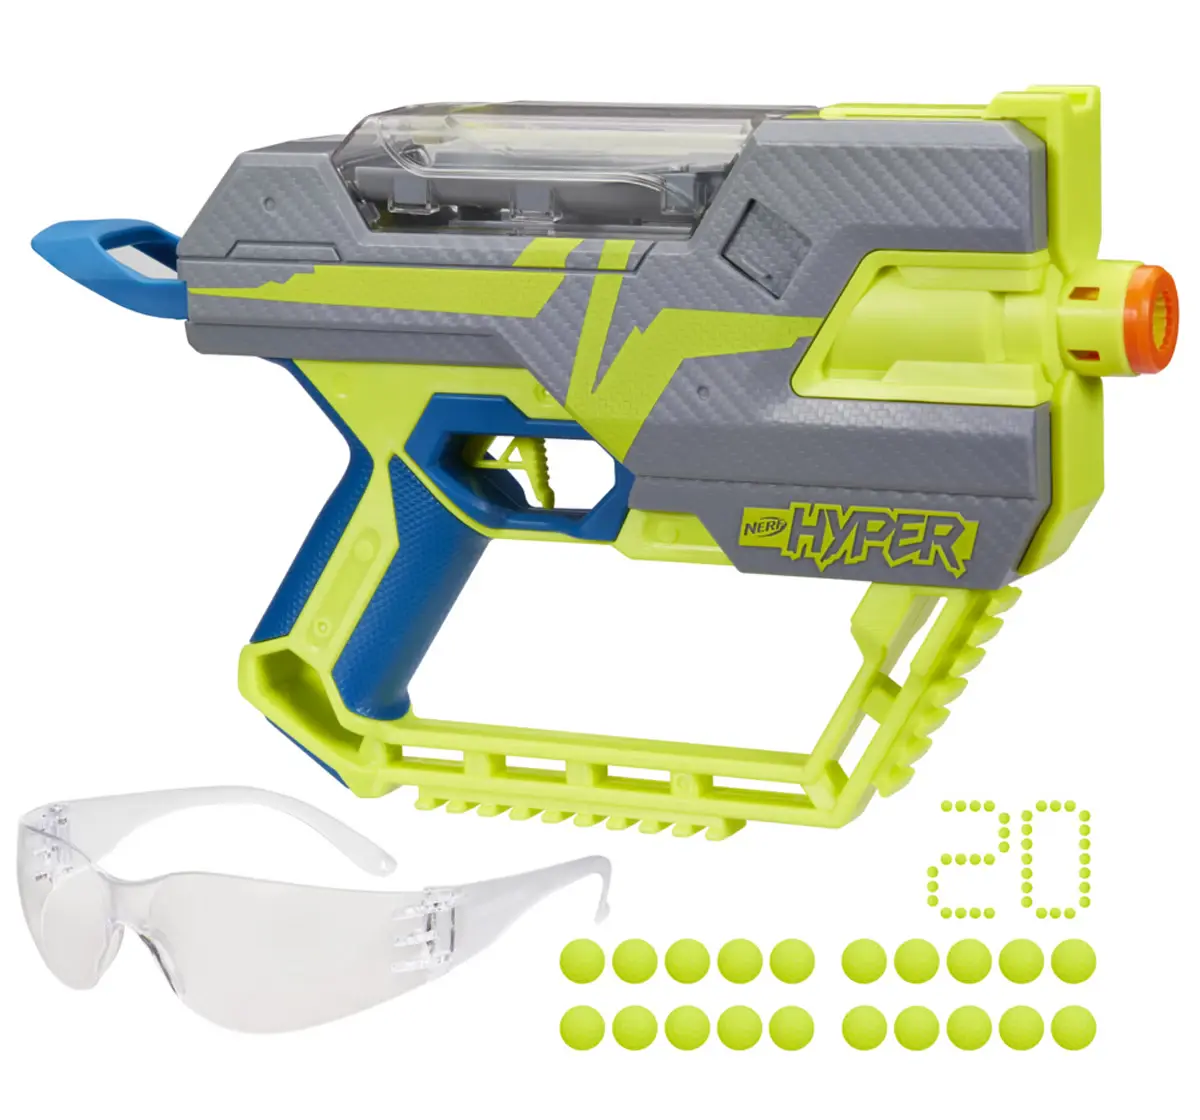 Nerf Hyper Fuel-20 Blaster, 20 Nerf Hyper Rounds, Up To 110 FPS Velocity, Hopper Fed, 20-Round Capacity, Easy Reload, Eyewear Included, 14Y+